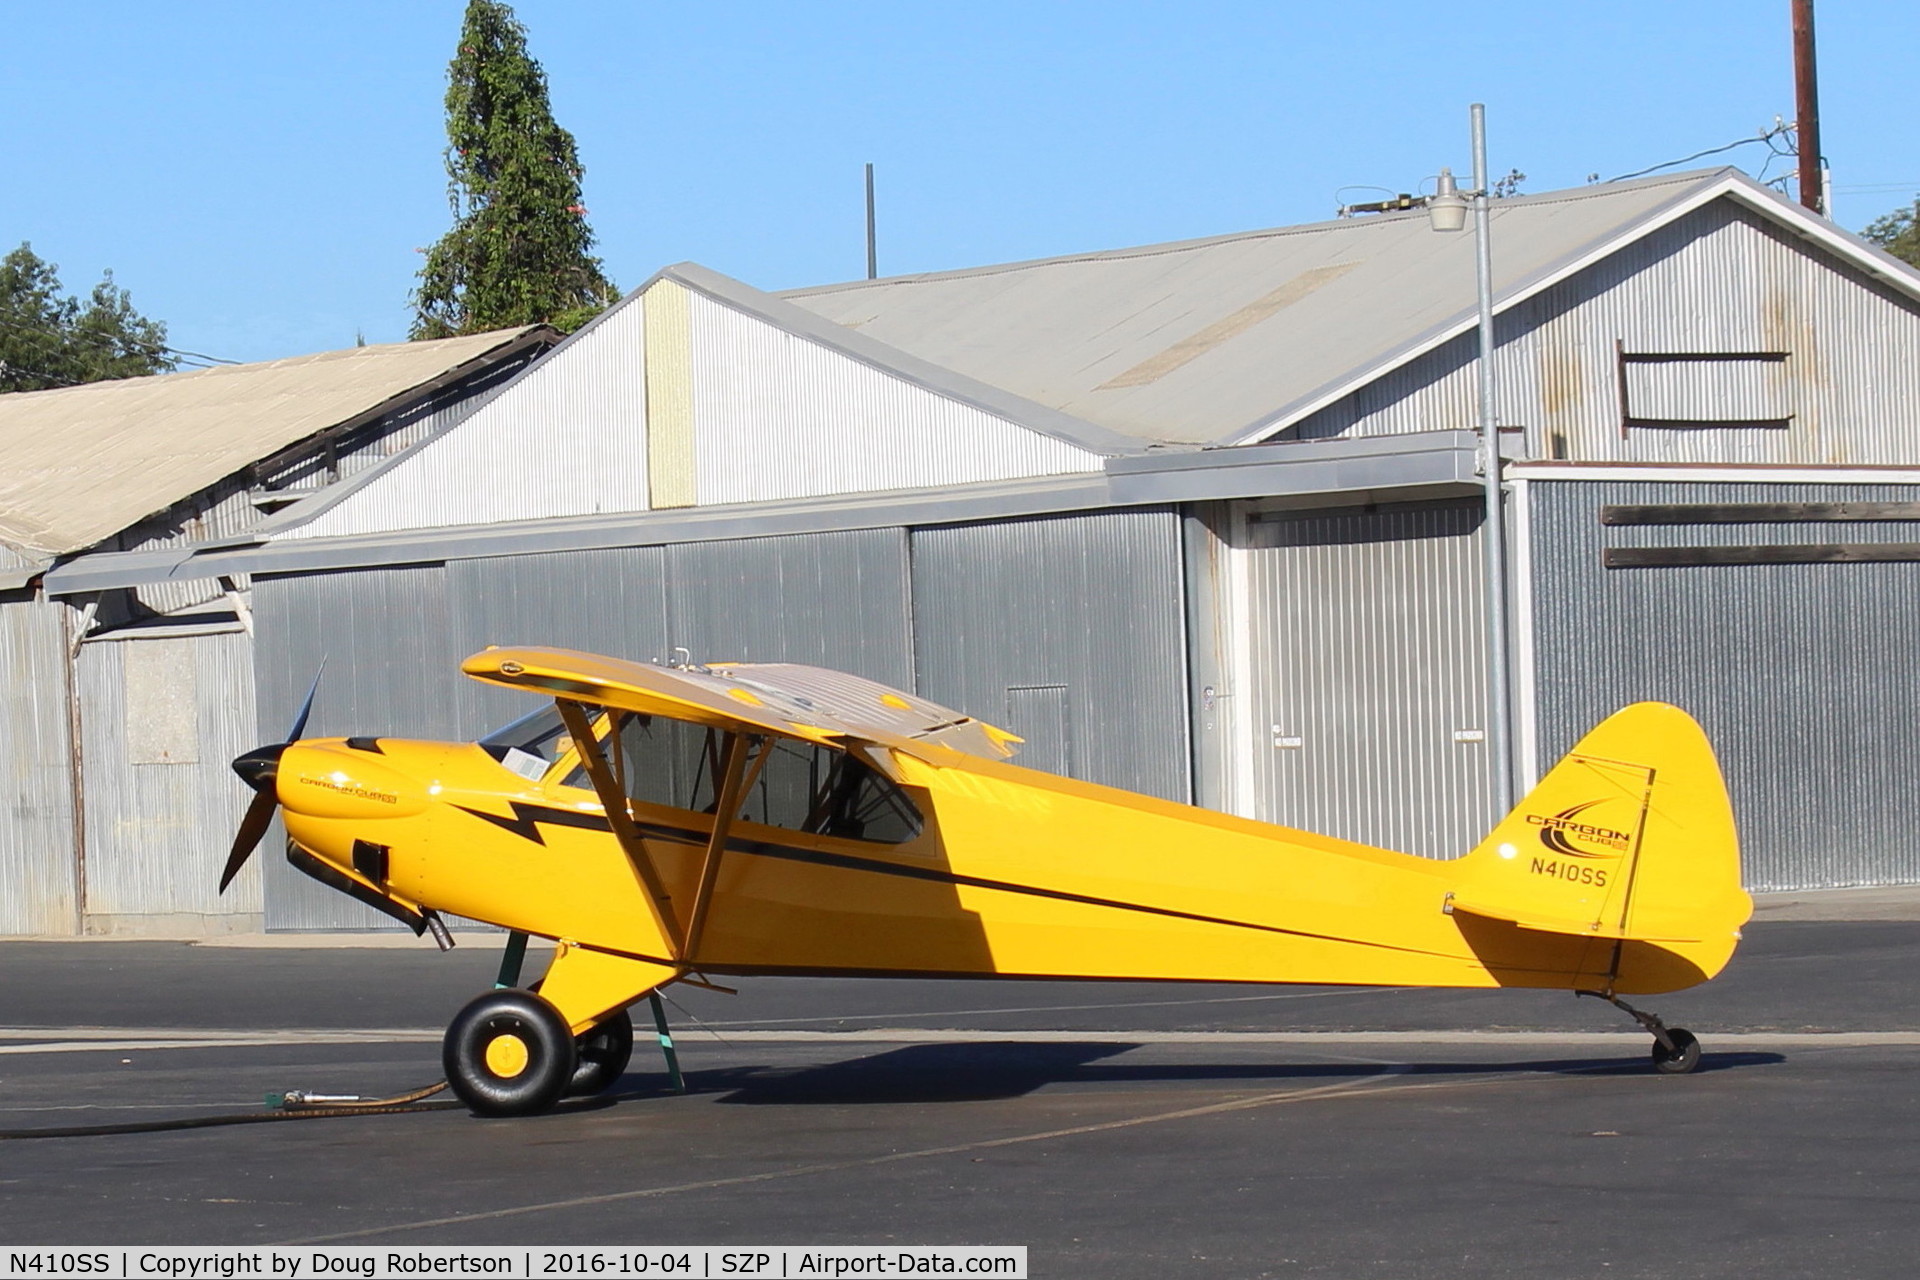 N410SS, 2013 Cub Crafters CC11-160 Carbon Cub SS C/N CC11-00292, 2013 CubCrafters CC11-160 CARBON CUB SS, S-LSA, CubCrafters CC340 rated 180 Hp for 5 minutes, 80 Hp continuous